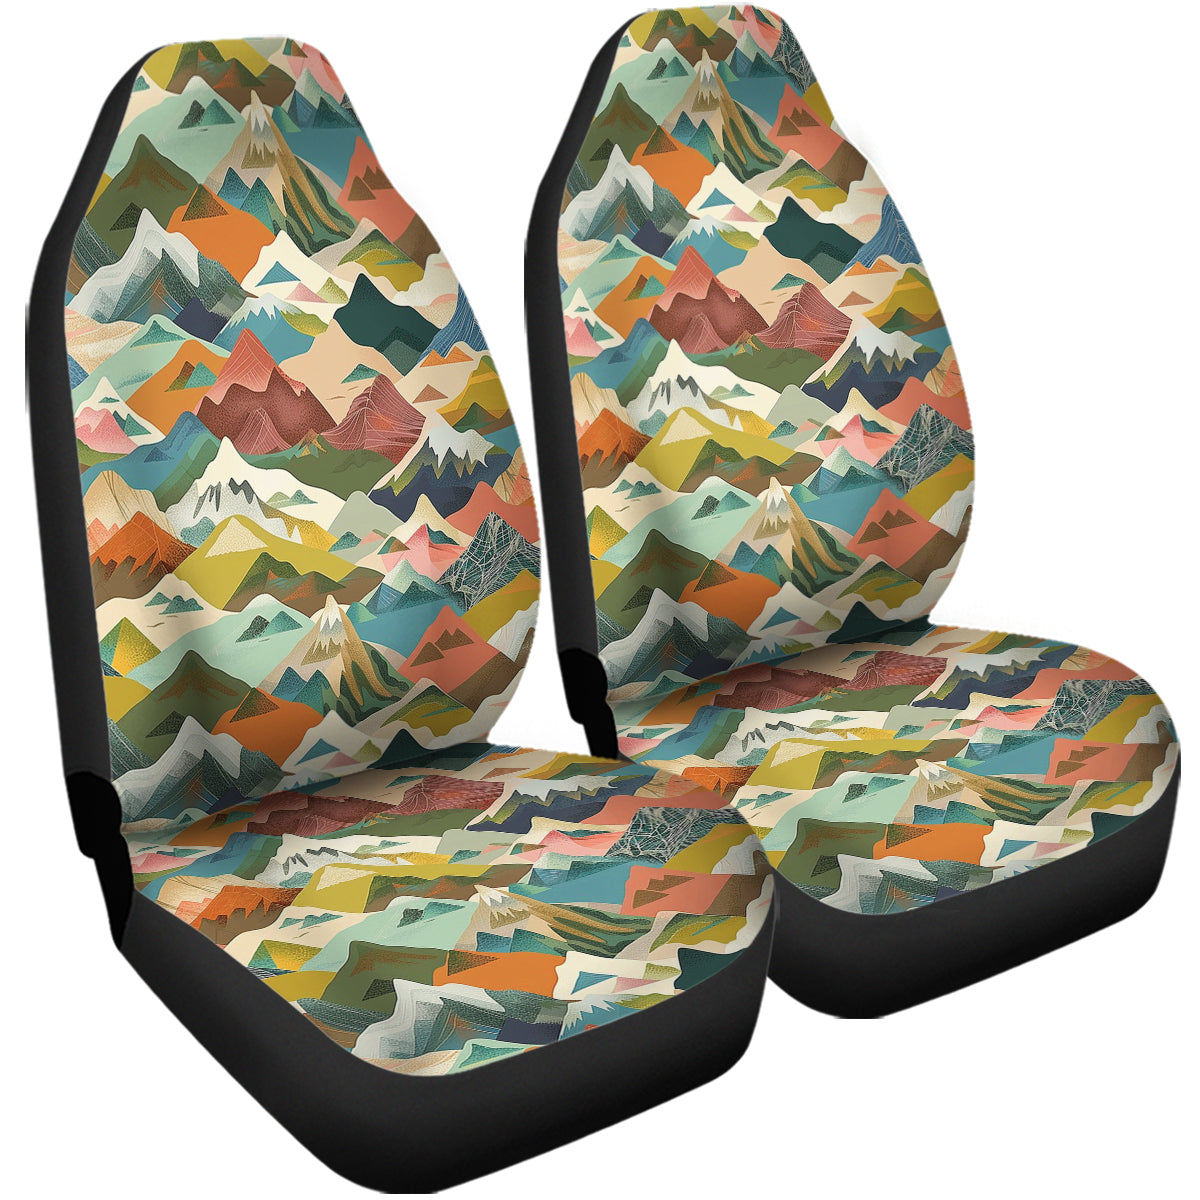 Boho Mountain Car Seat Covers Car Seat Accessory Retro Mod Car Decor Vehicle Hippie Van Seat Cover Car Gift Hippy Seat Cover, Pattern 02